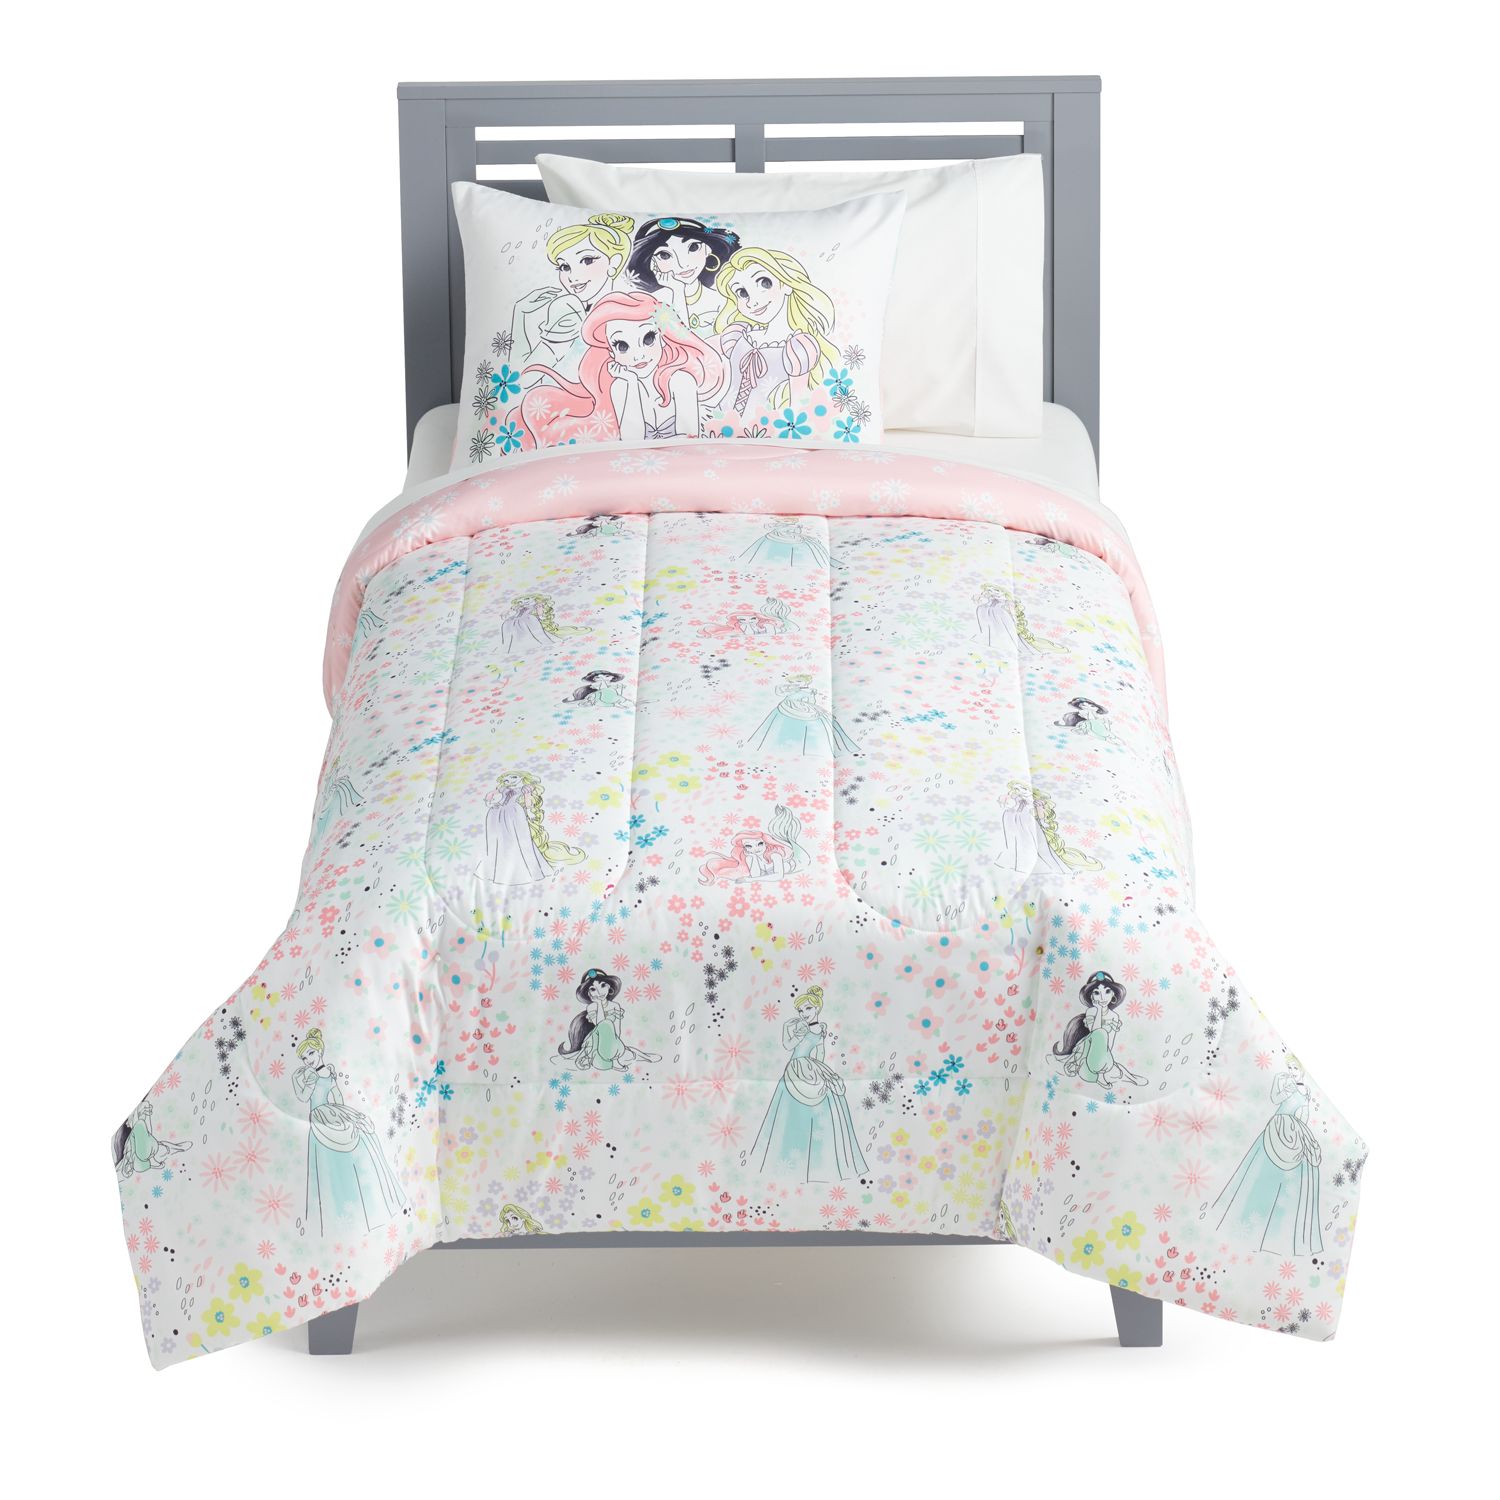 Image for Disney / The Big One Disney Princess Floral Comforter Set with Shams by The Big One® at Kohl's.